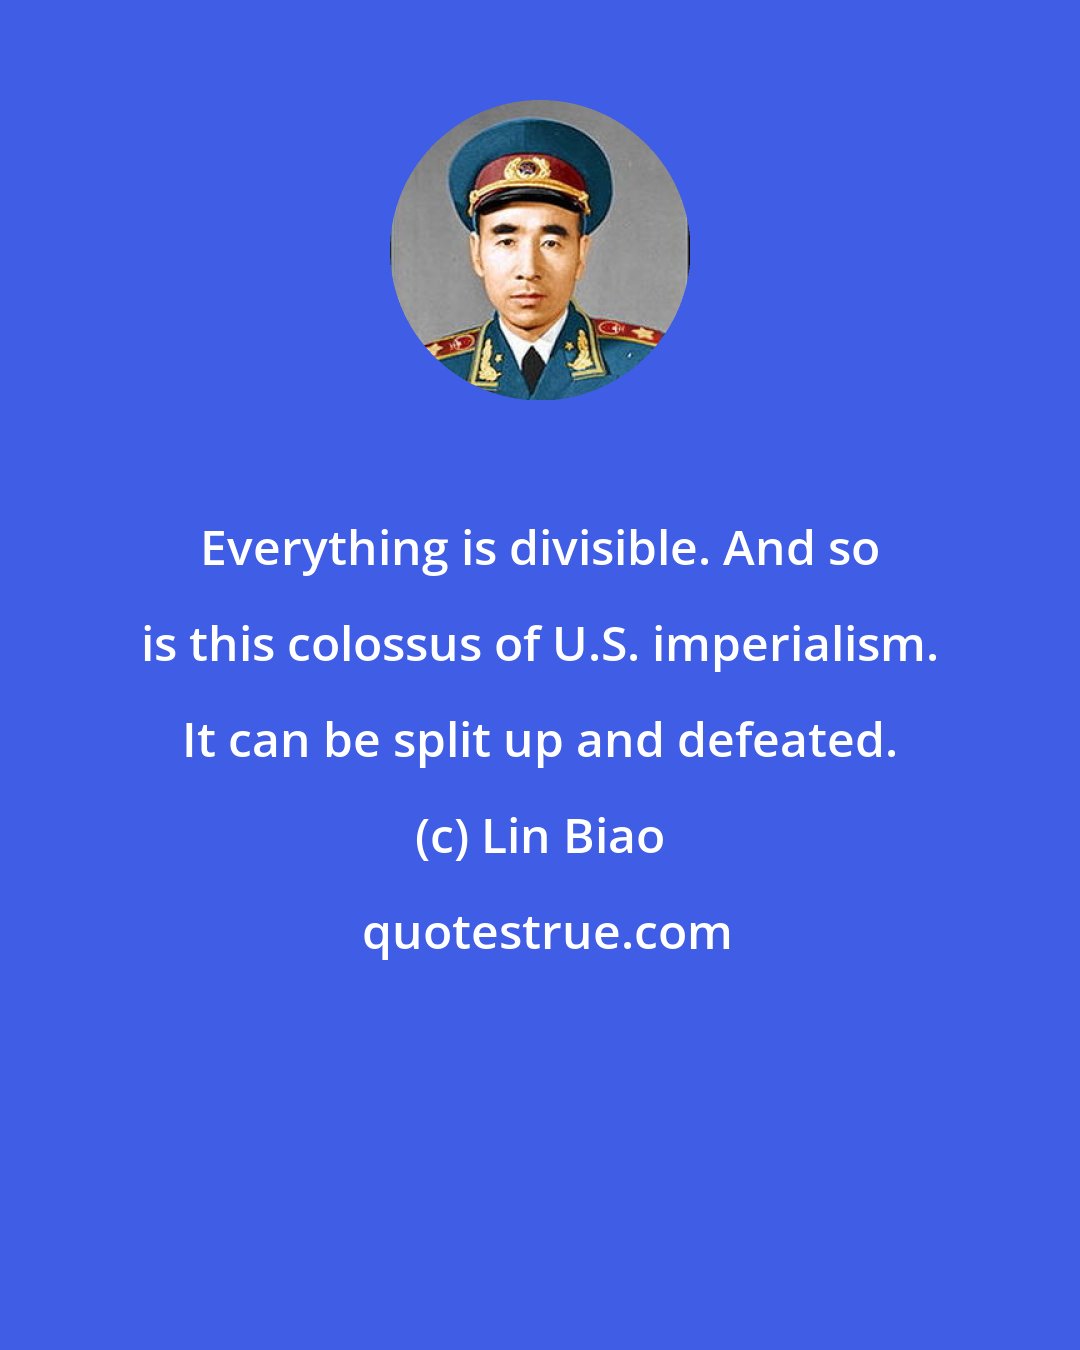 Lin Biao: Everything is divisible. And so is this colossus of U.S. imperialism. It can be split up and defeated.